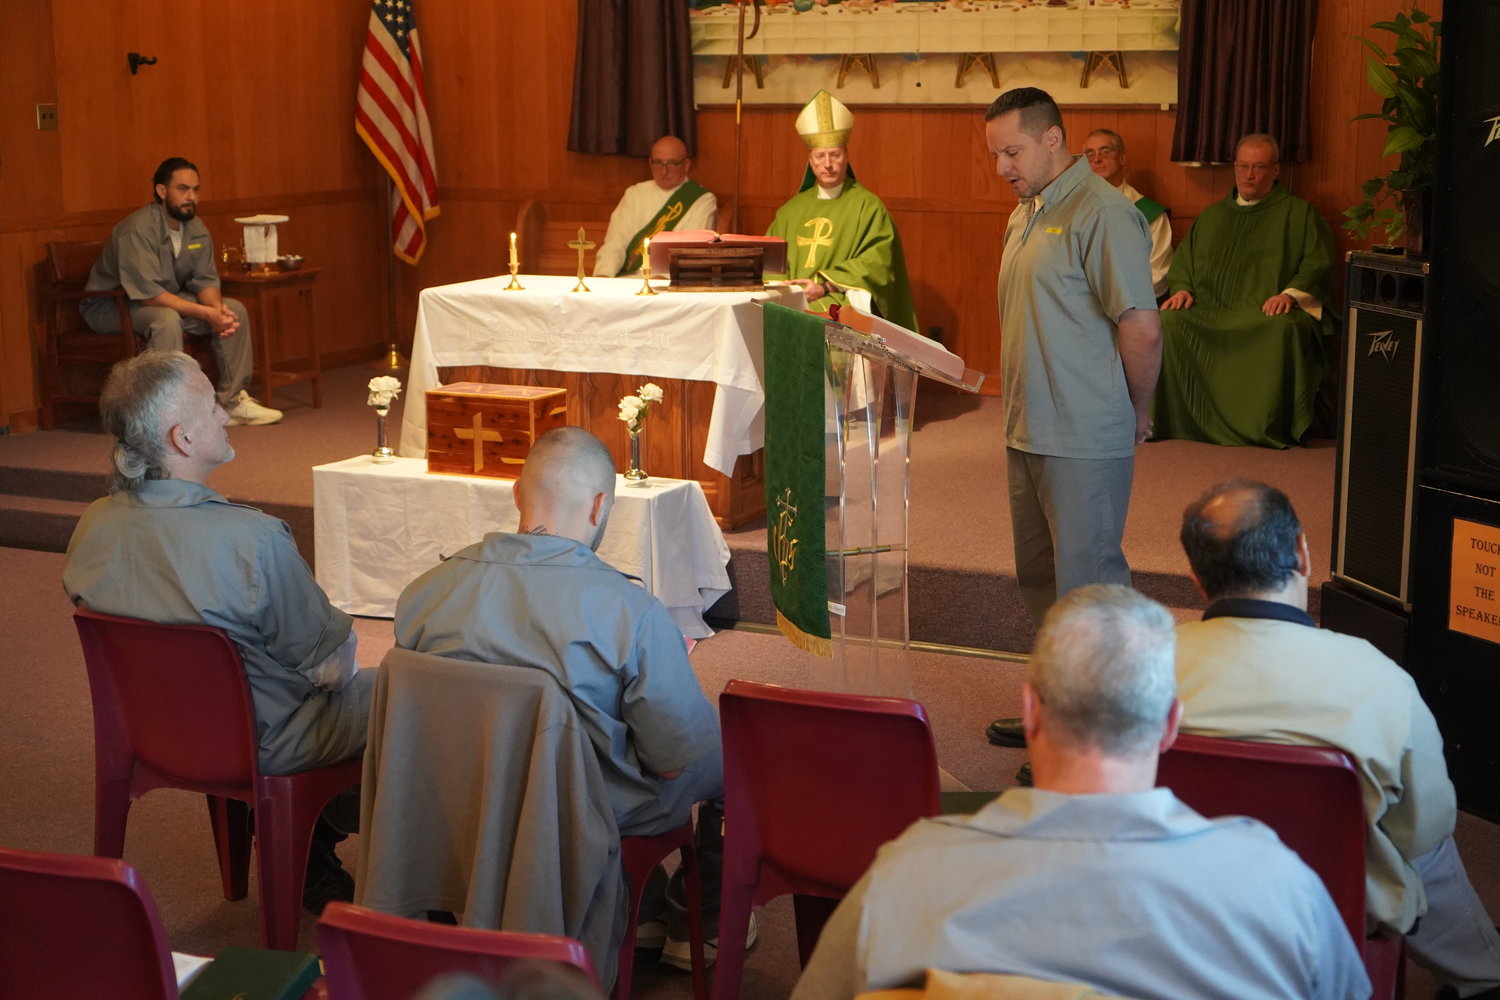 A resident of the Algoa Correctional Center in Jefferson City proclaims a reading during a Nov. 6 Mass offered by Bishop W. Shawn McKnight and Father Michael Penn in the prison chapel.